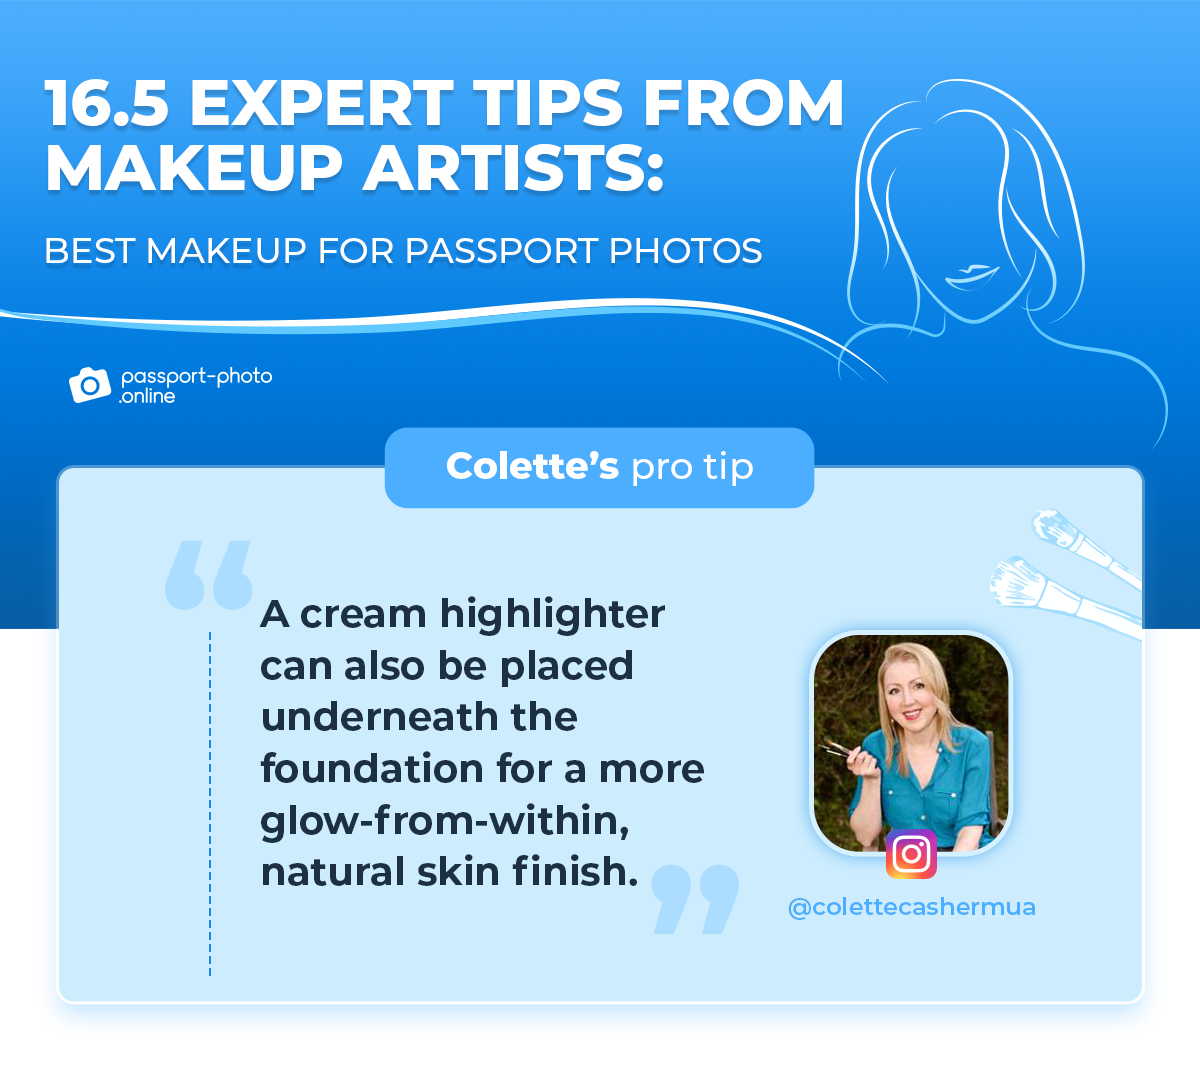 Professional tip to apply a cream highlighter under your foundation for a more natural look.